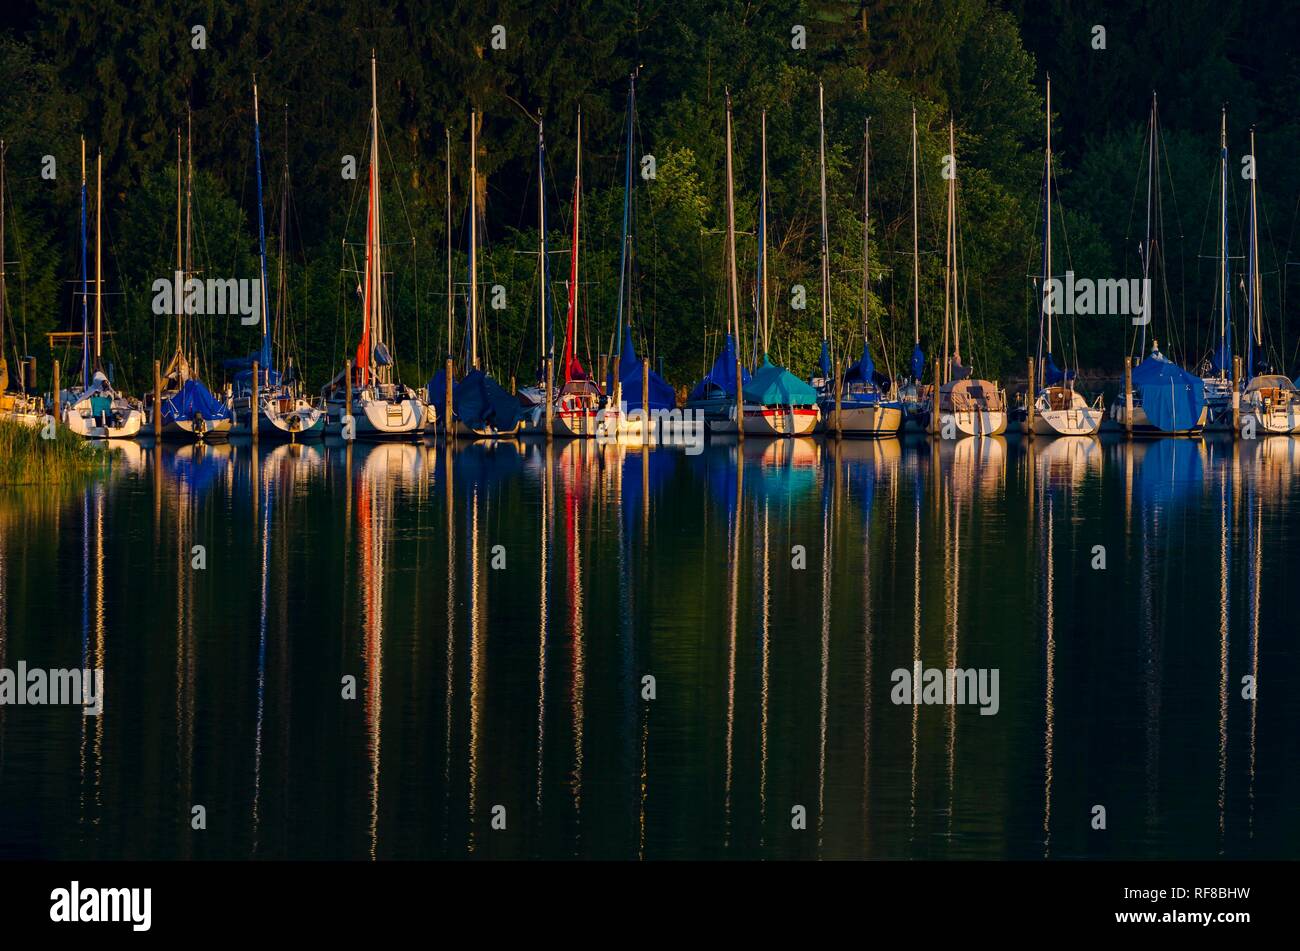 Sailboats with reflection in water, feet, Bavaria, Germany Stock Photo